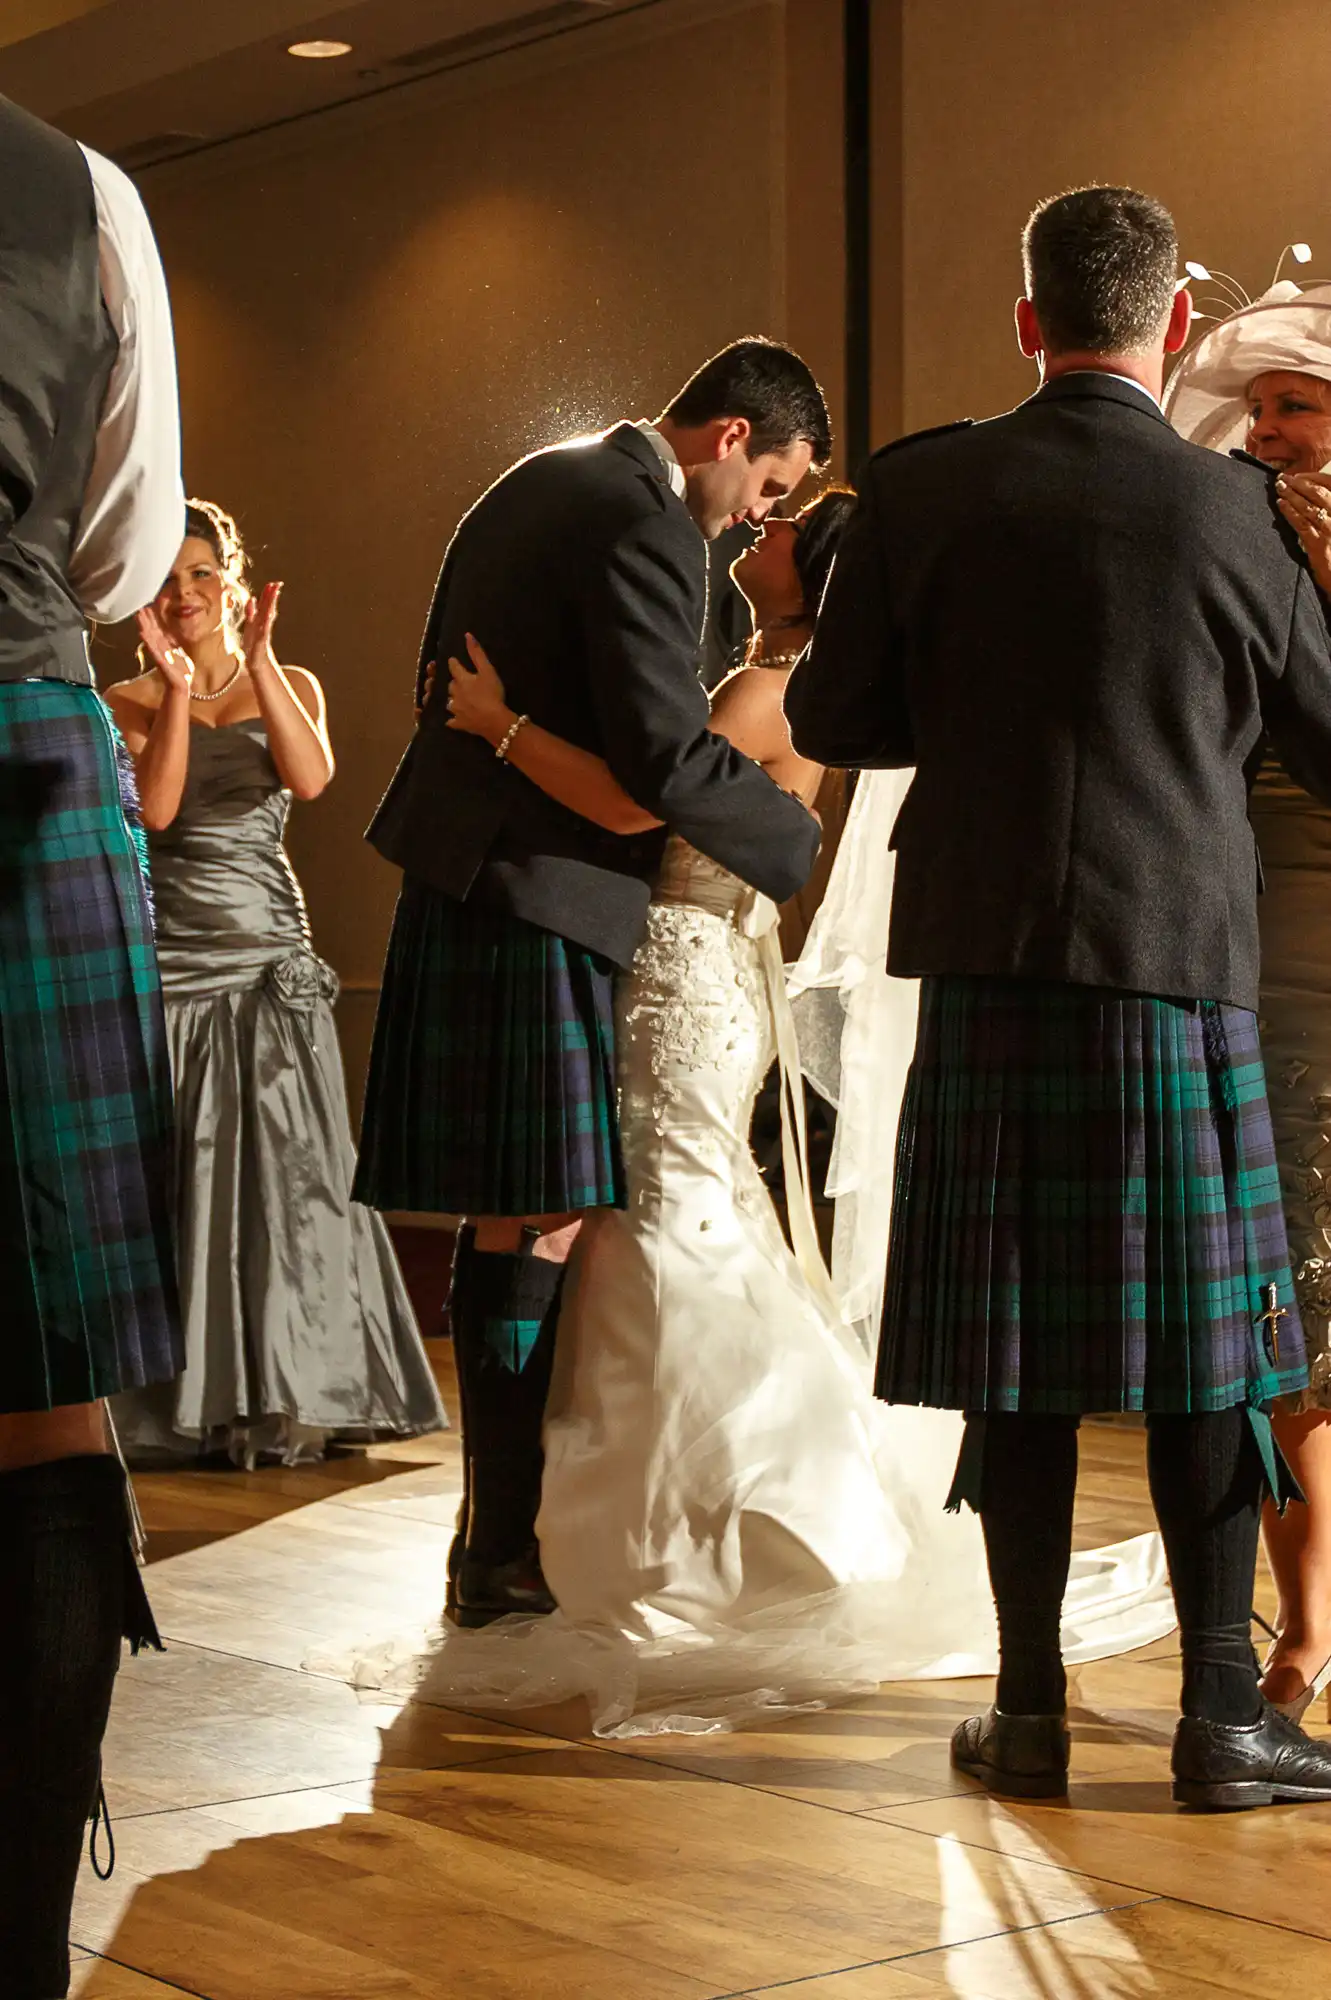 A couple in wedding attire, including kilts, share a kiss on a dance floor surrounded by applauding guests.